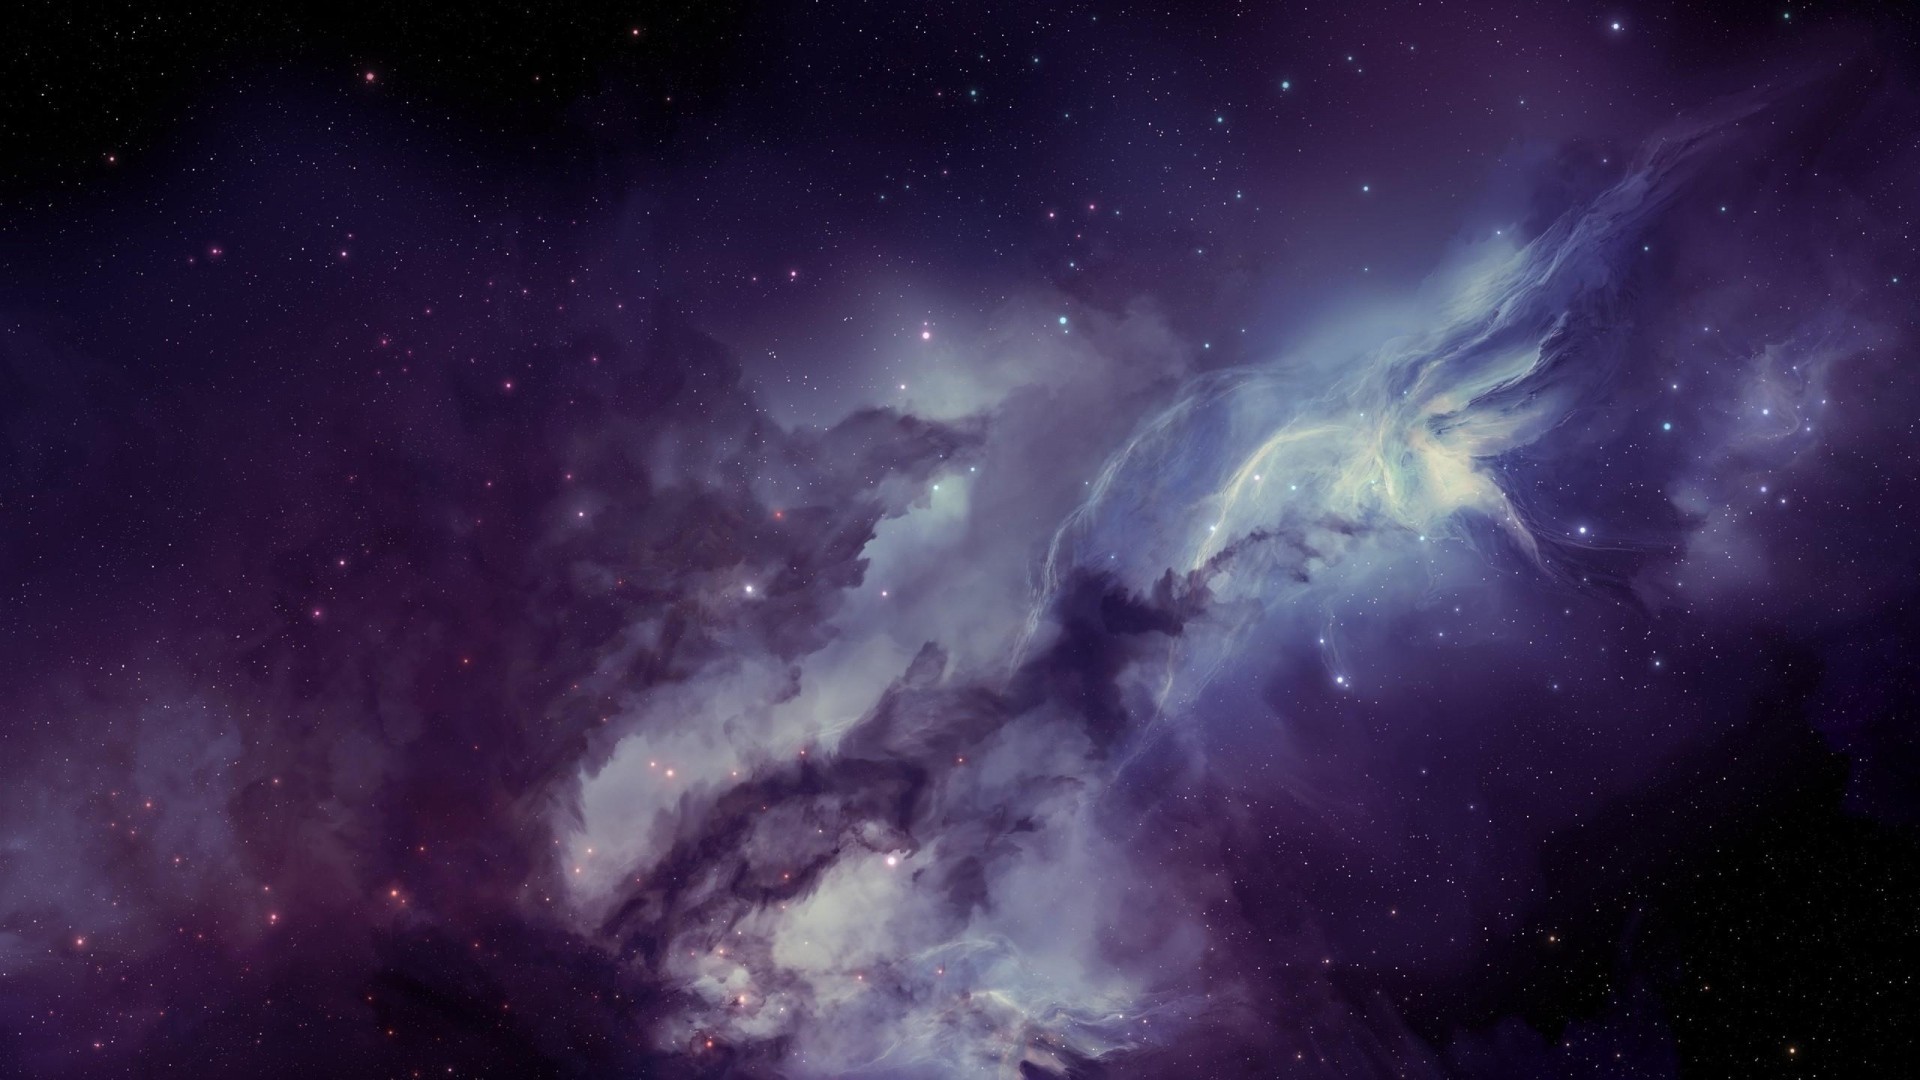  Galaxy  wallpaper  HD    Download  free  awesome HD  wallpapers  